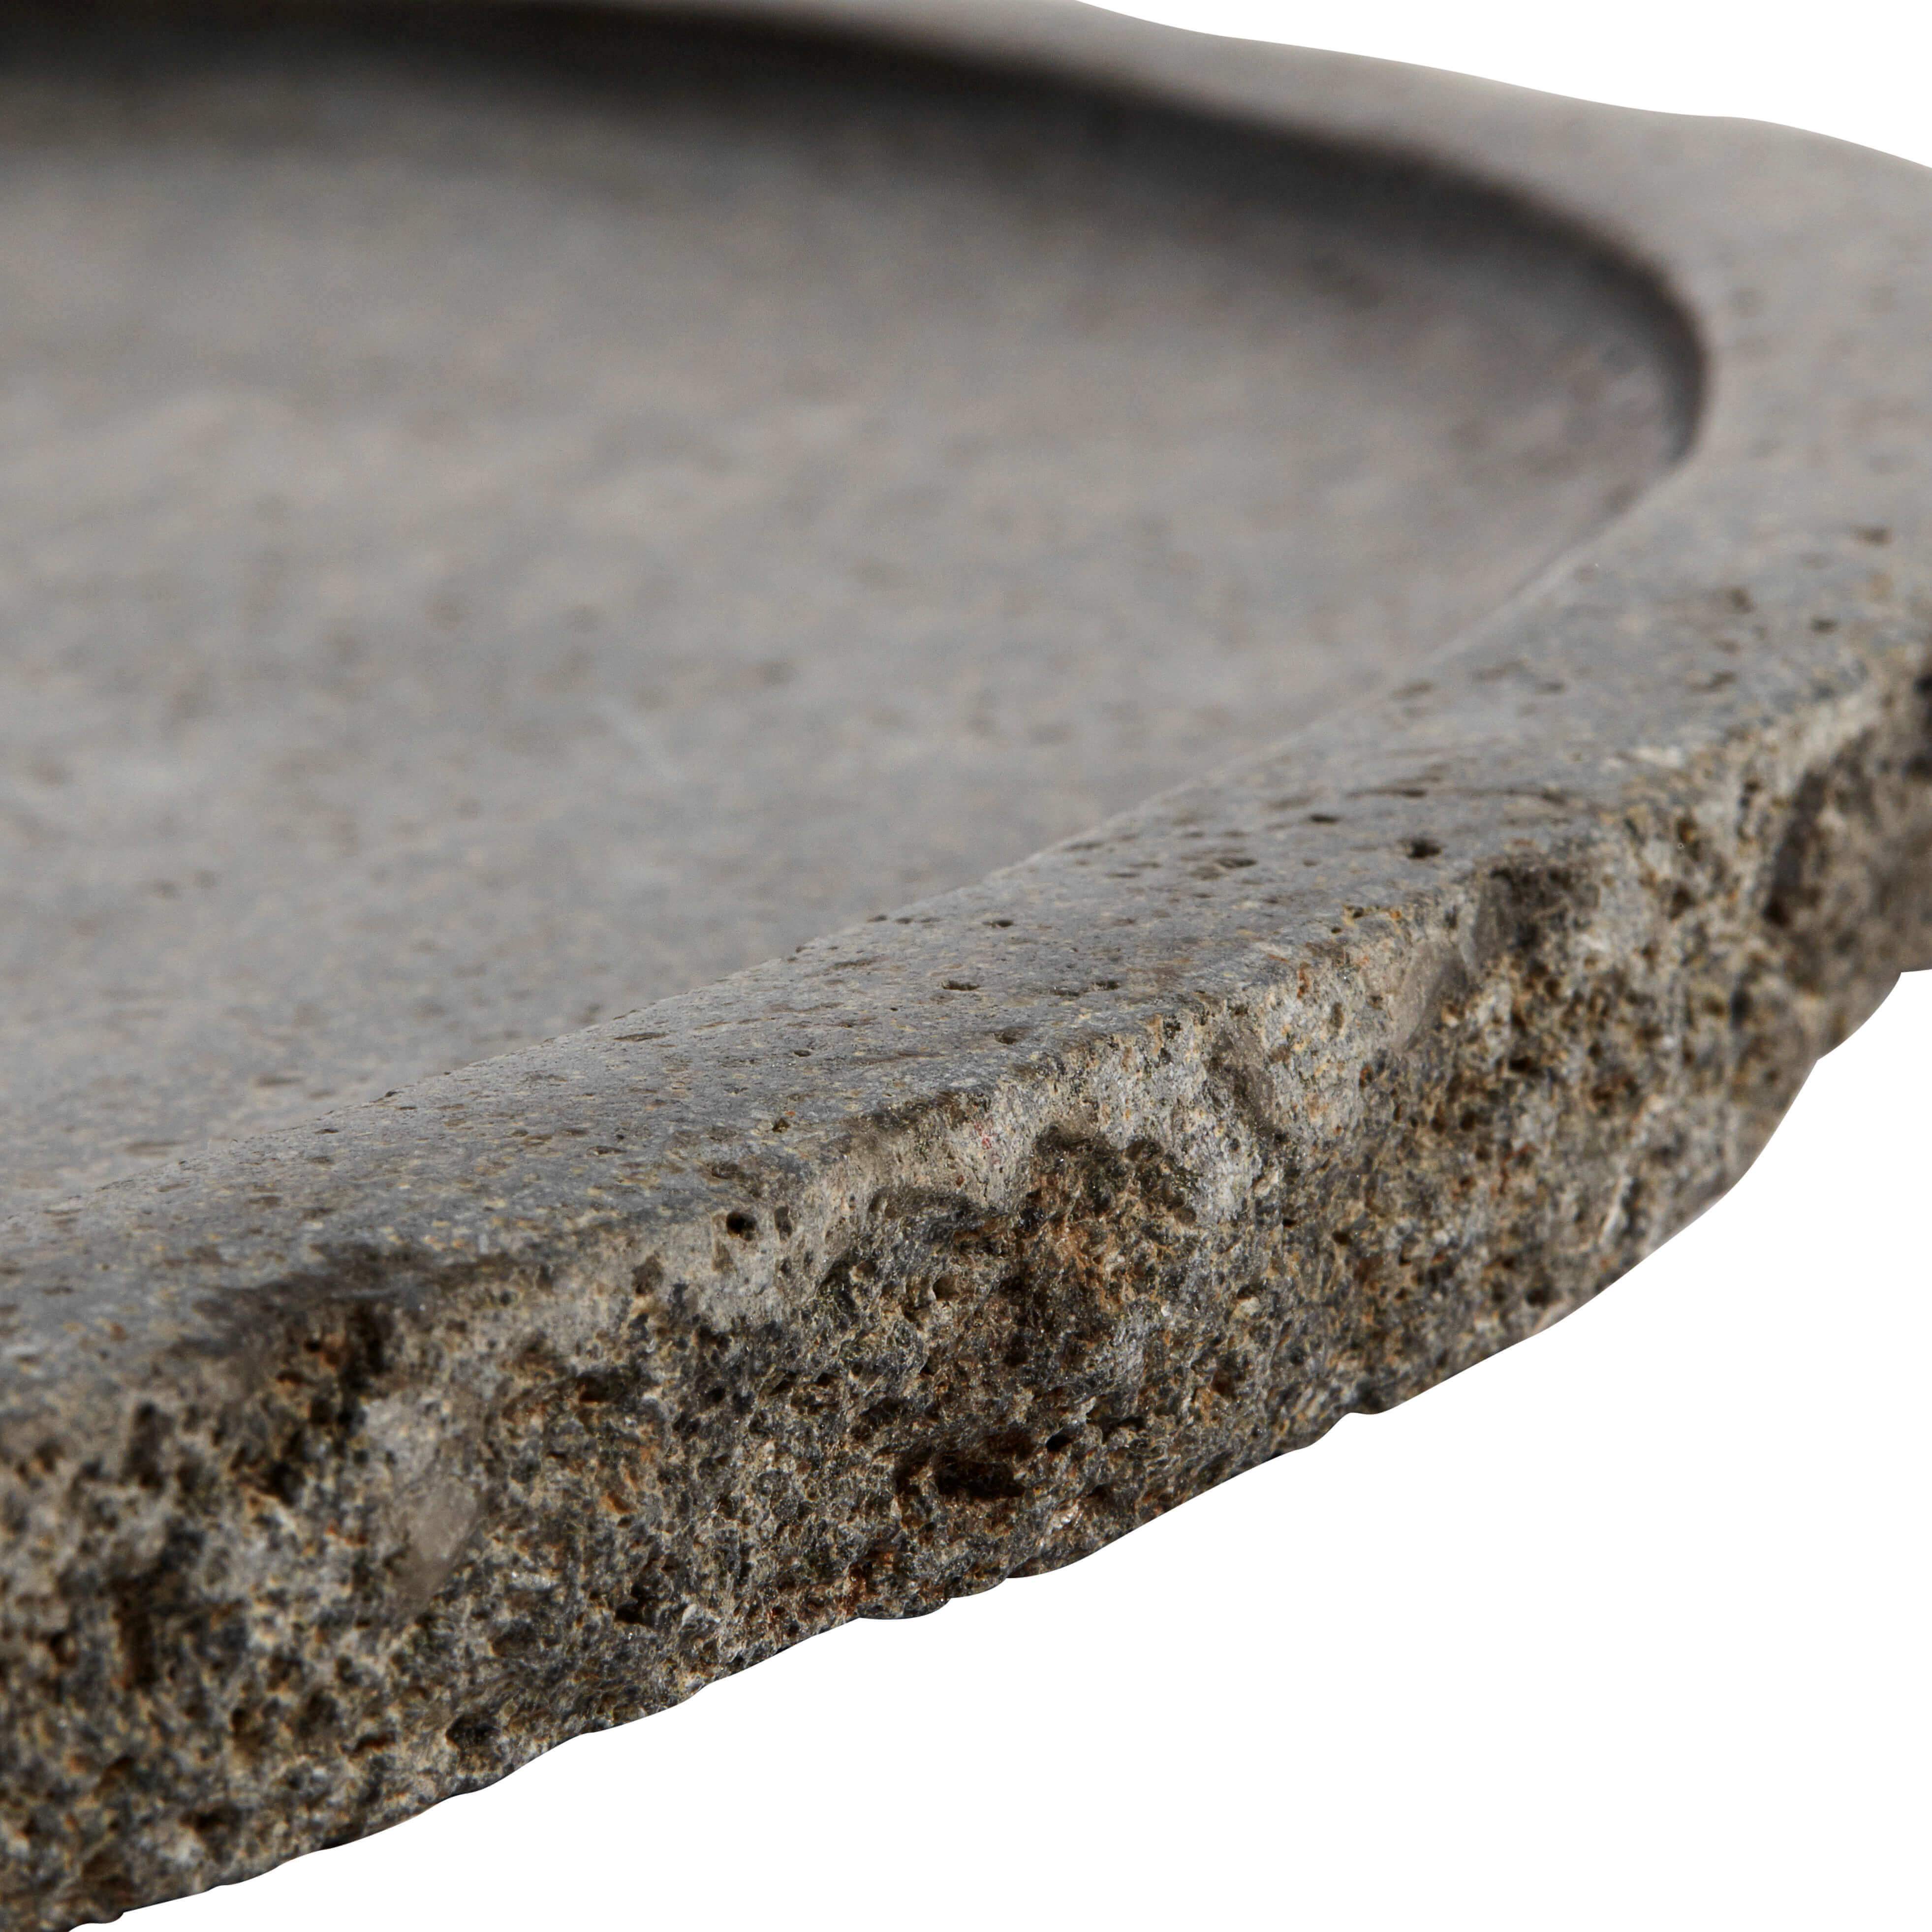 MUUBS Valley Servering Plate Riverstone, 40 cm